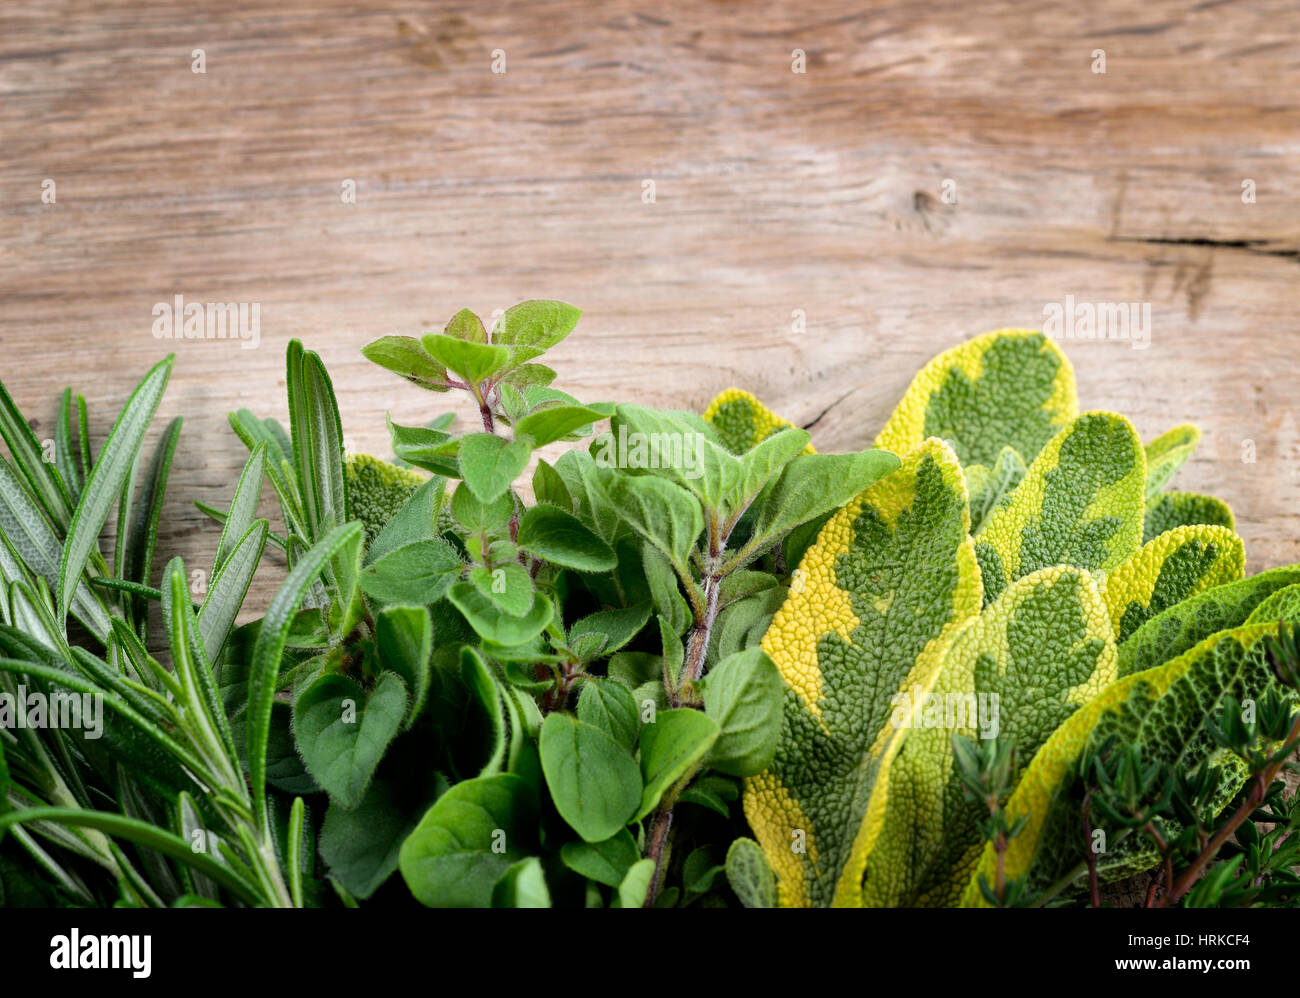 Freshly harvested herbs: rosemary, oregano, sage and thyme over wooden background. Copy space, top view. Stock Photo